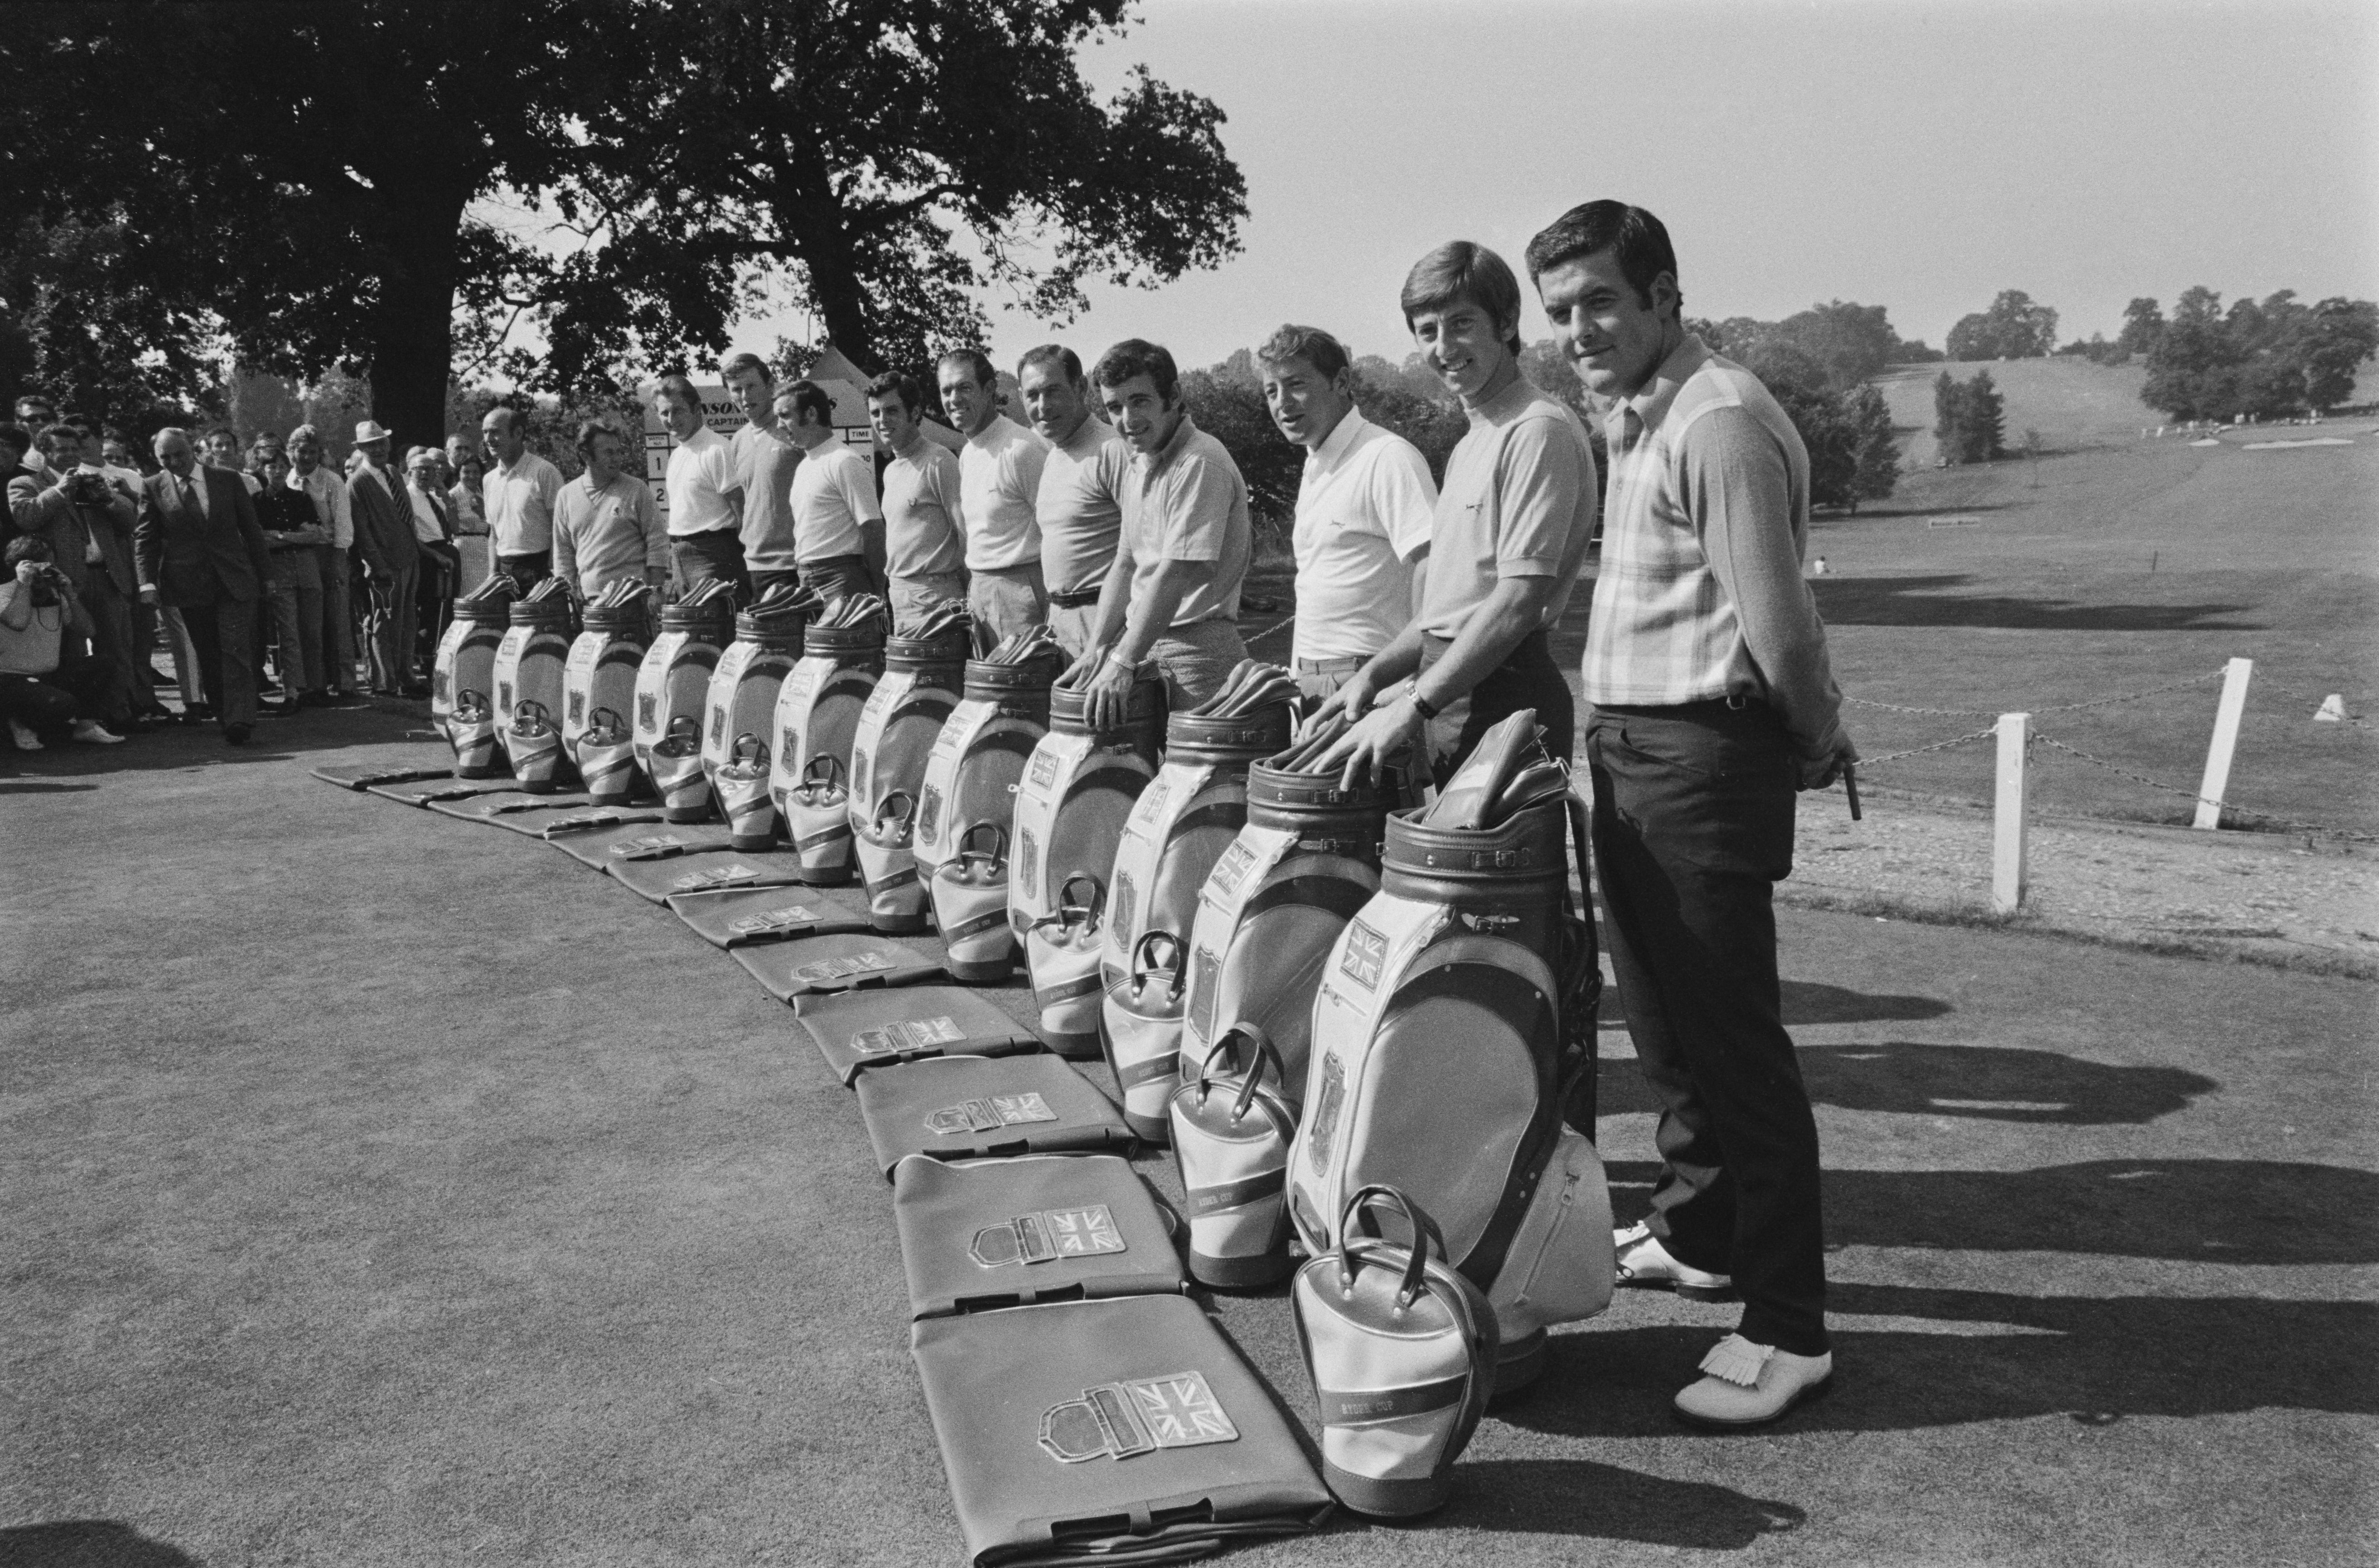 The 1971 Ryder Cup was Oosterhuis’s first appearance and he became a staple of the team for the next decade